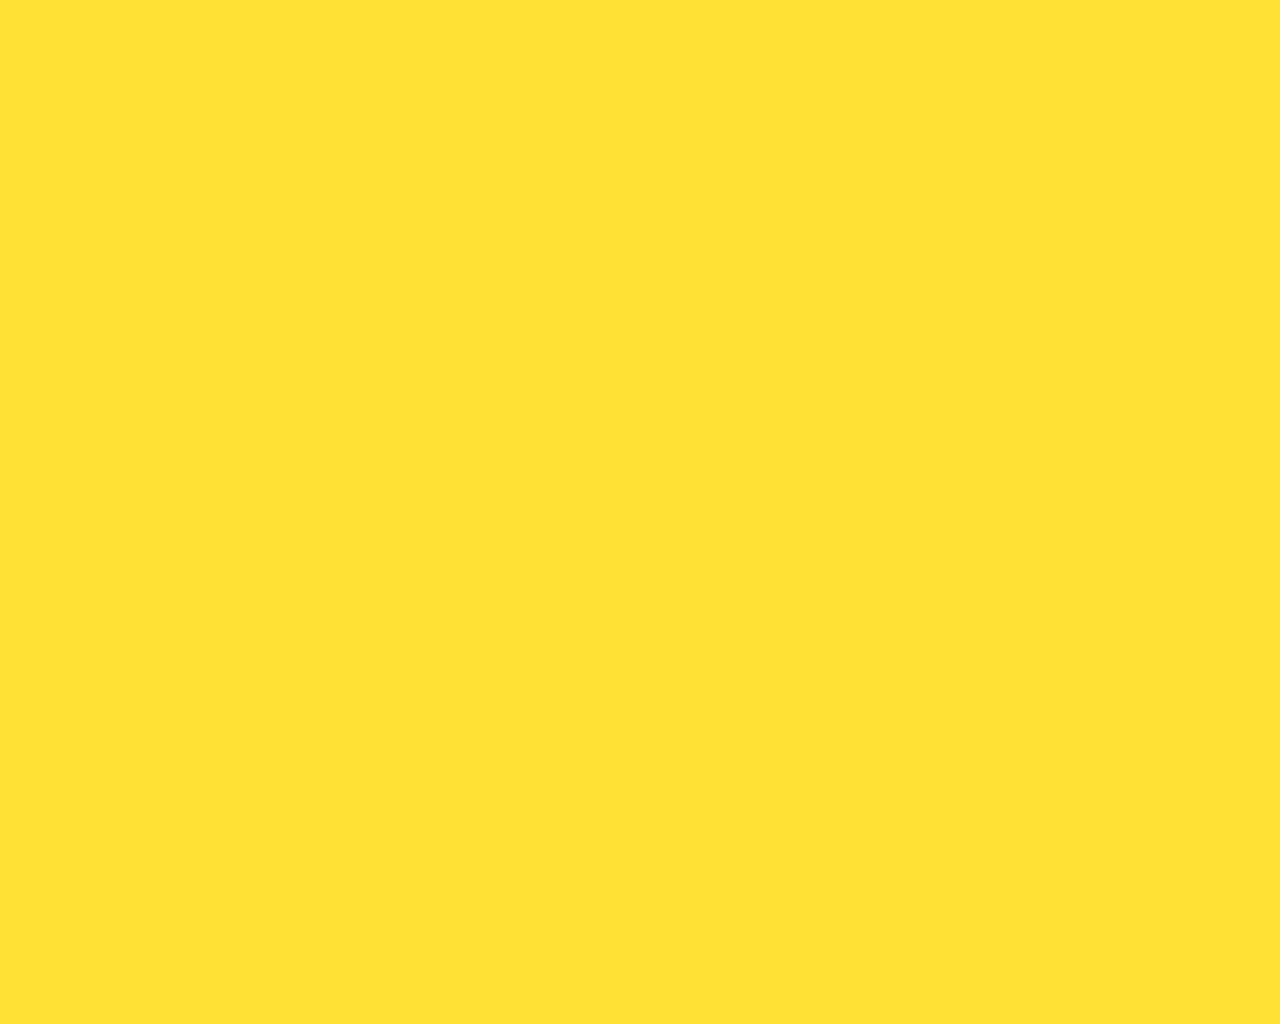 1280x1024-banana-yellow-solid-color-background.jpg